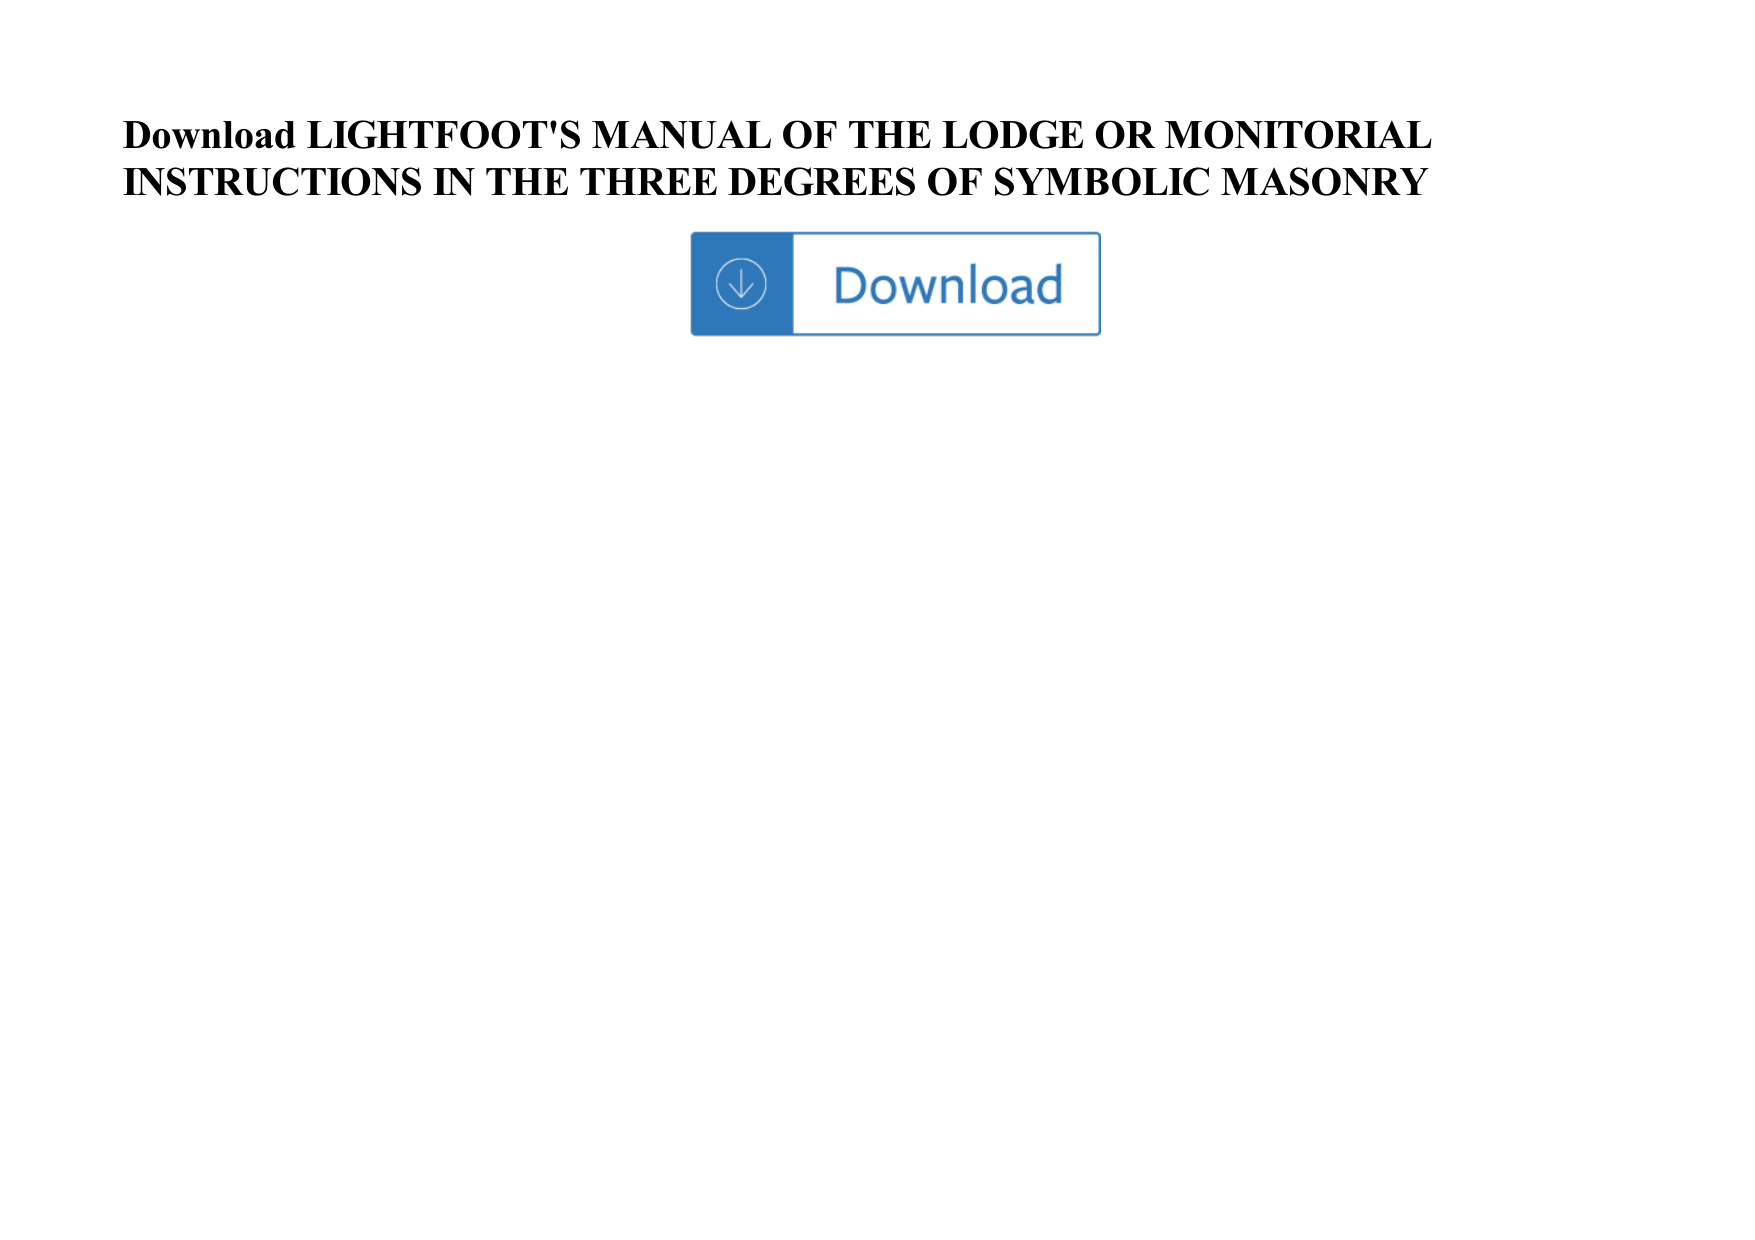 Page 1 of 2 - LIGHTFOOT'S MANUAL OF THE LODGE OR MONITORIAL INSTRUCTIONS IN THREE DEGREES SYMBOLIC MASONRY Lightfoot-s-manual-of-the-lodge-or-monitorial-instructions-in-the-three-degrees-of-symbolic-masonry